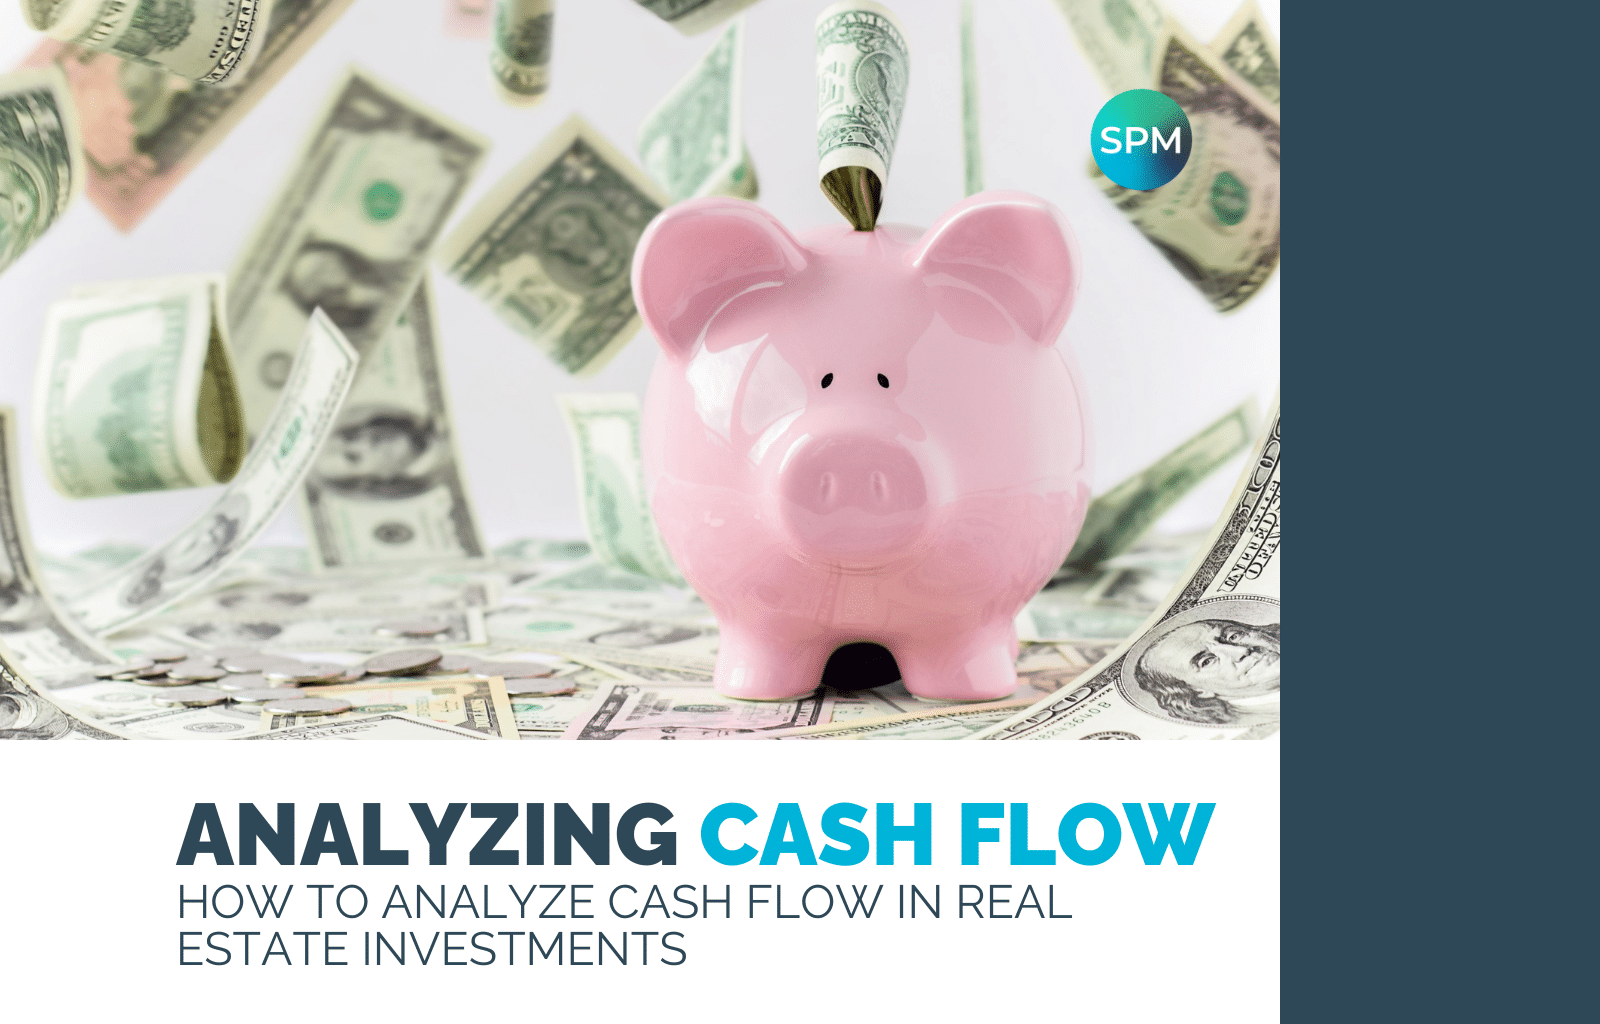 Analyze Cash Flow in Real Estate Investments